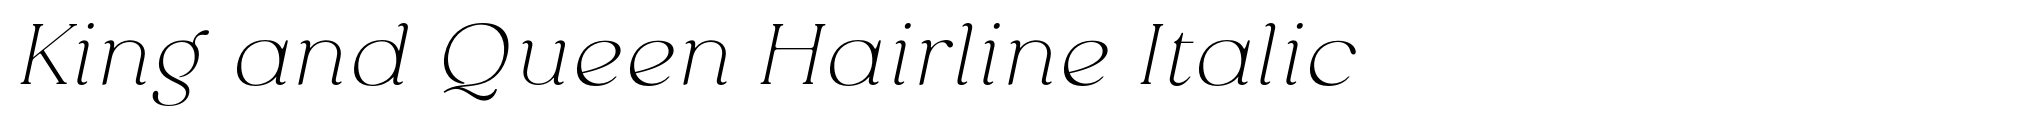 King and Queen Hairline Italic image